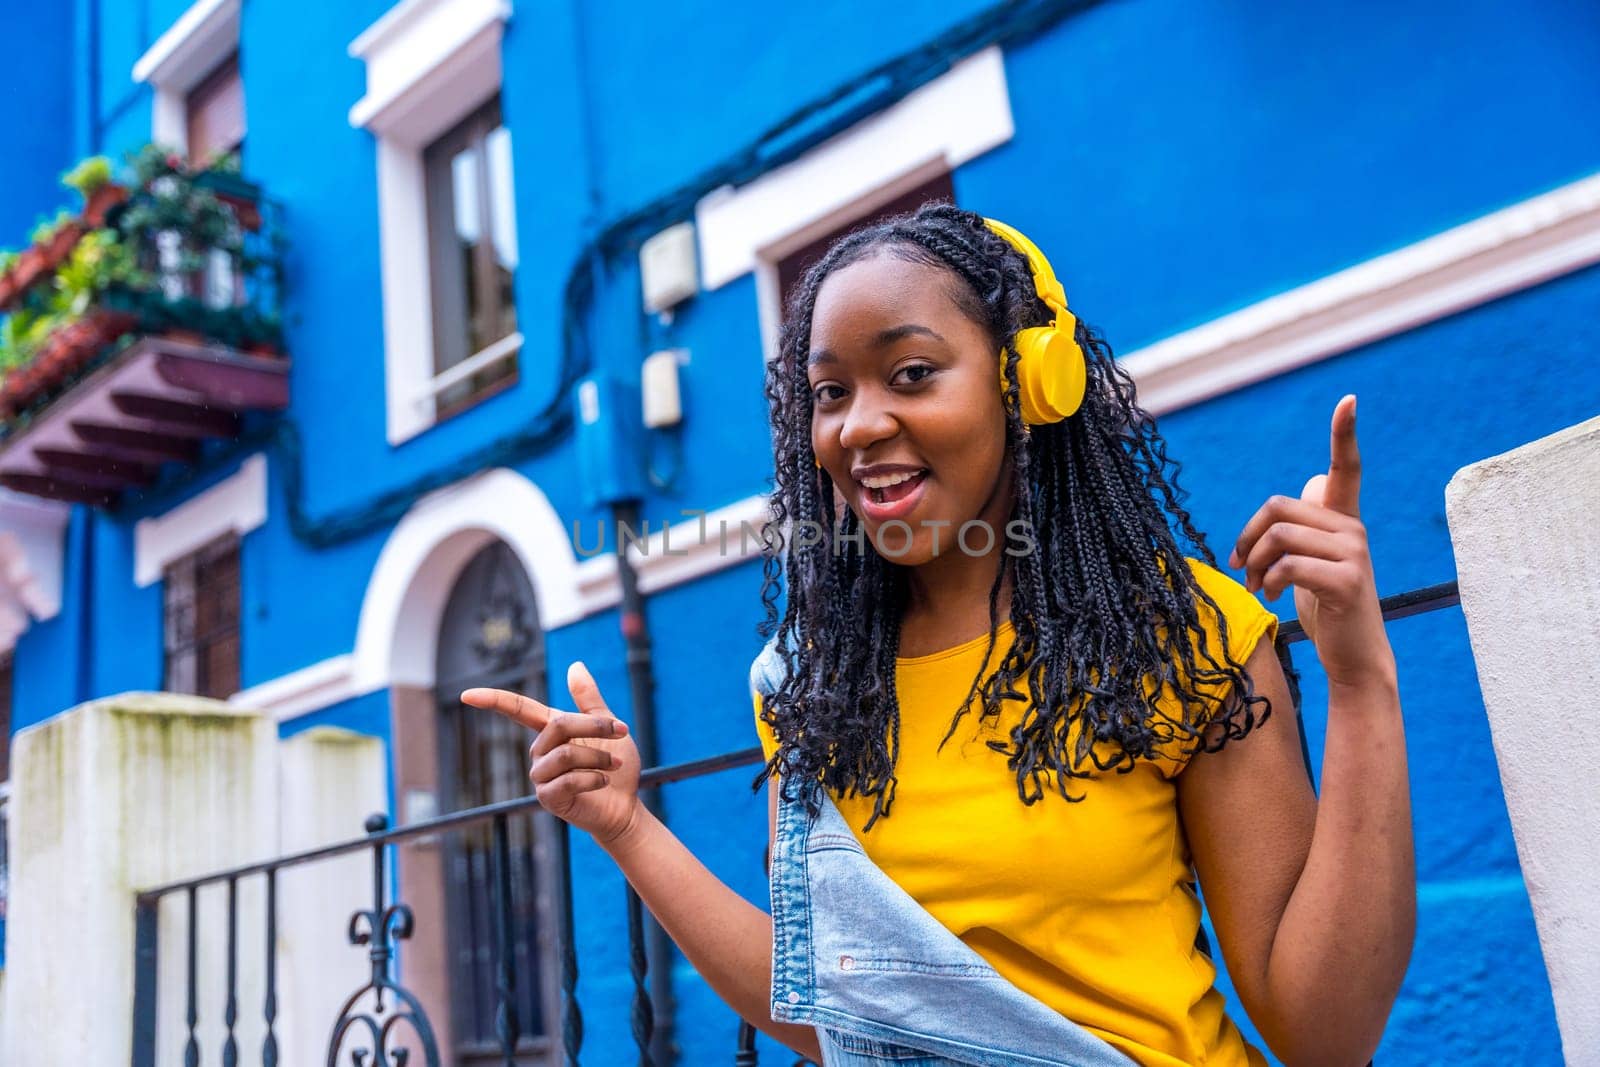 African woman singing while listening to music with headphones standing in a street with blue colored houses